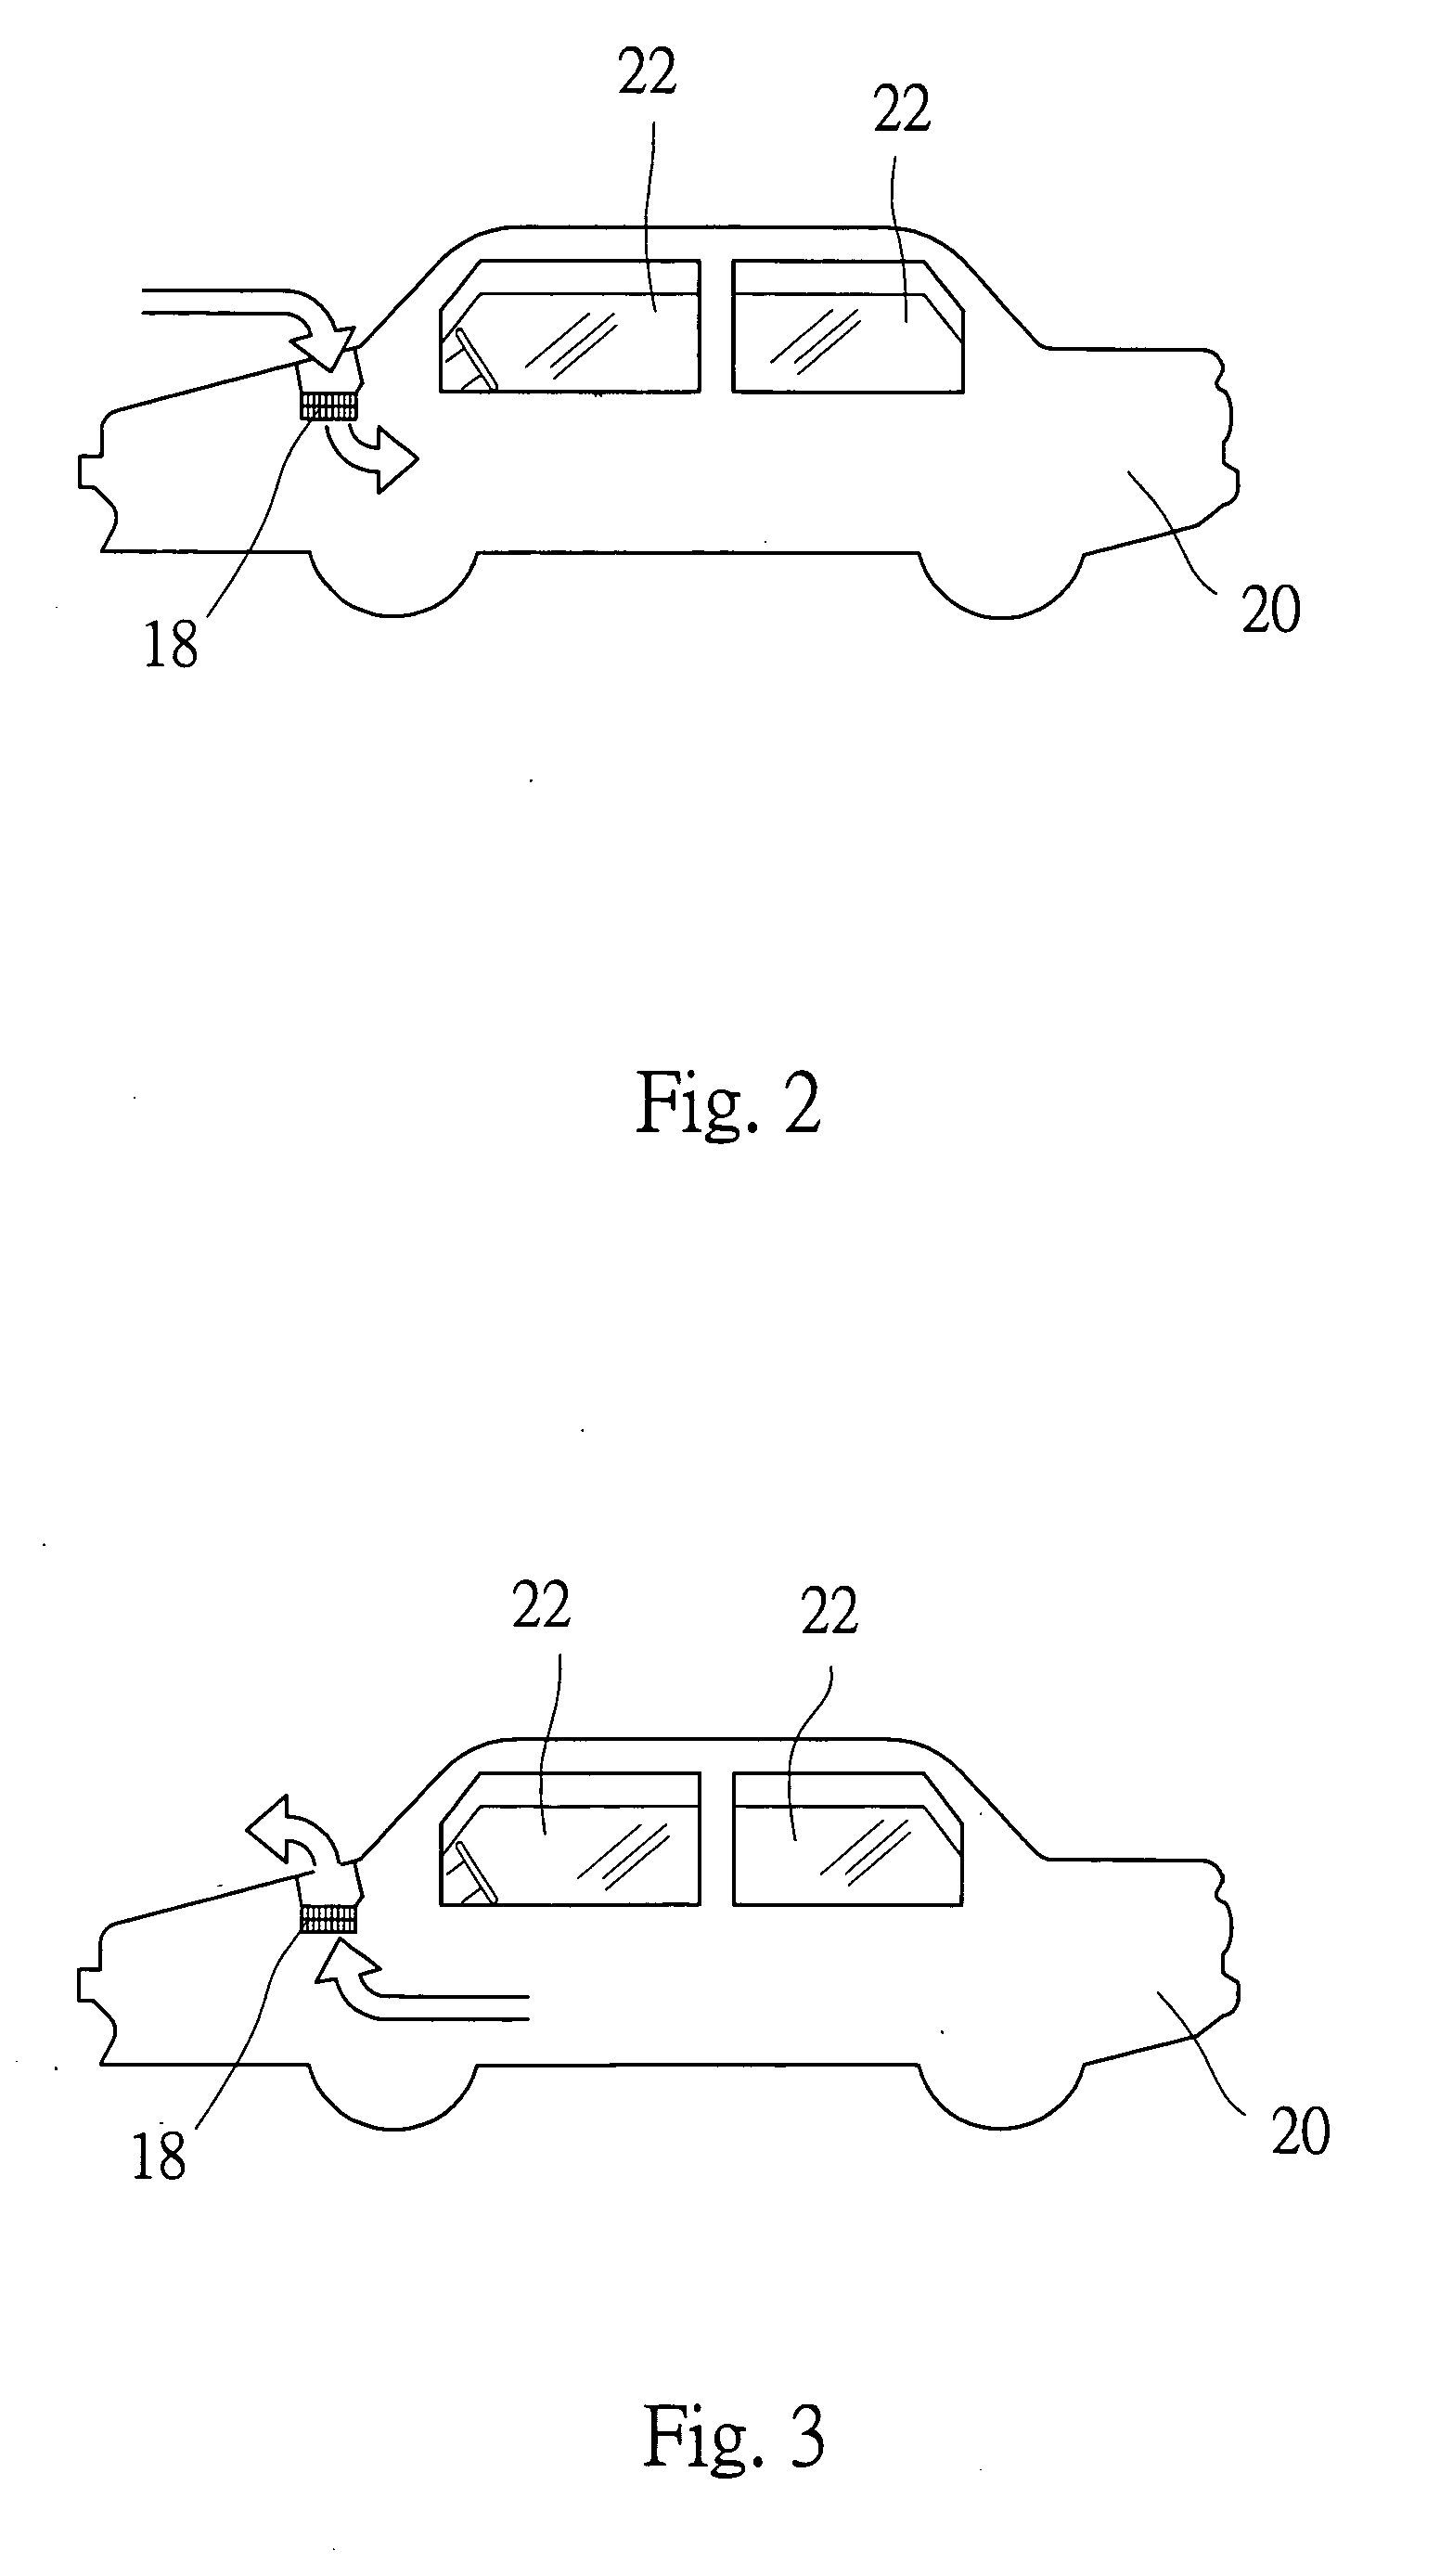 Safety device for controlling ventilation of a vehicle compartment